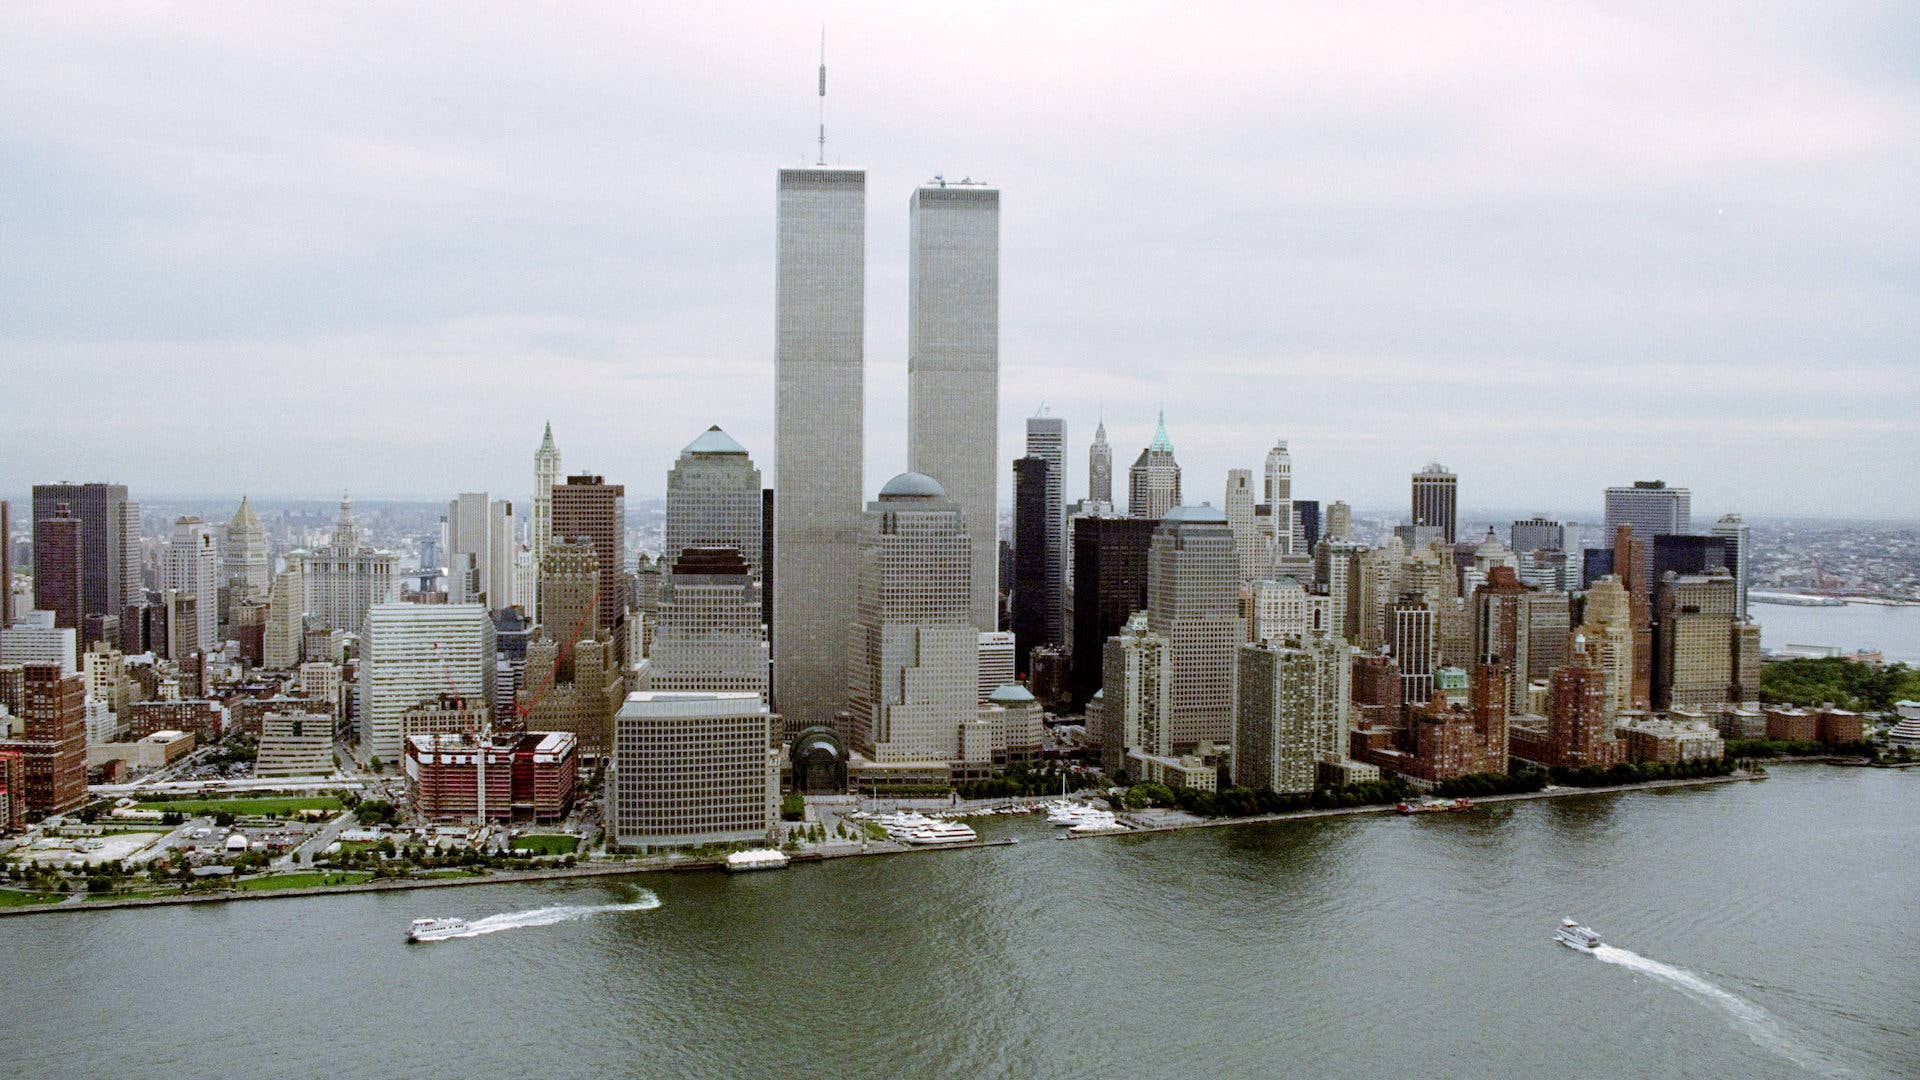 Image of Twin Towers in New York City